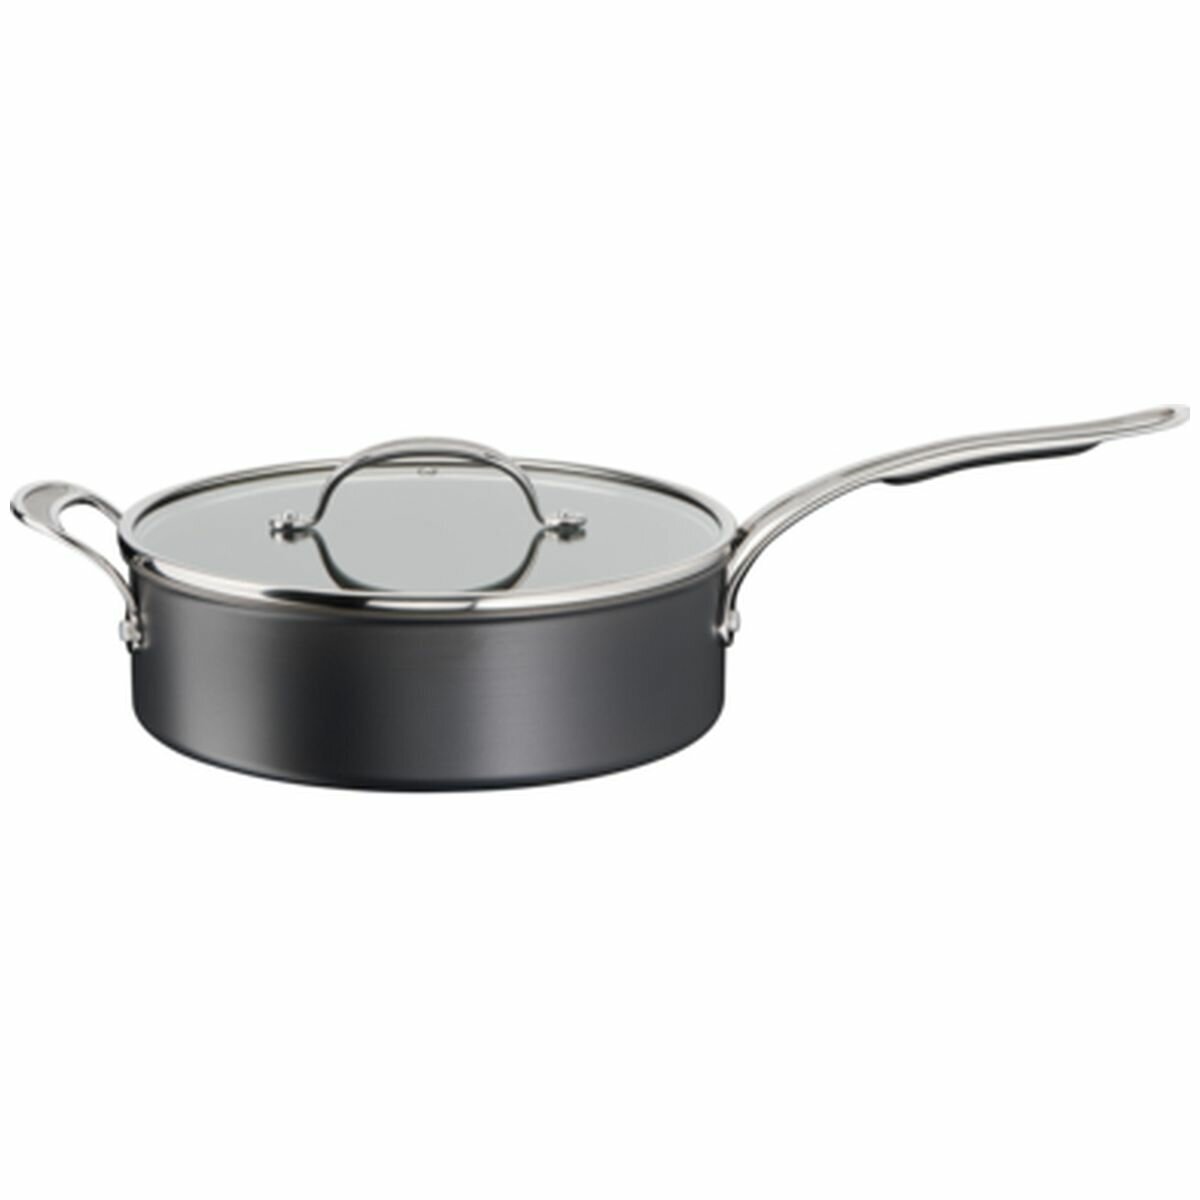 https://www.winnings.com.au/ak/d/1/0/b/d10bd8ea04ab93fc98e0f0592c0f0d21fab492e2_tefal_jamie_oliver_cooks_classics_induction_non_stick_hard_anodised_5_piece_cookware_set_h912s5-high.jpeg